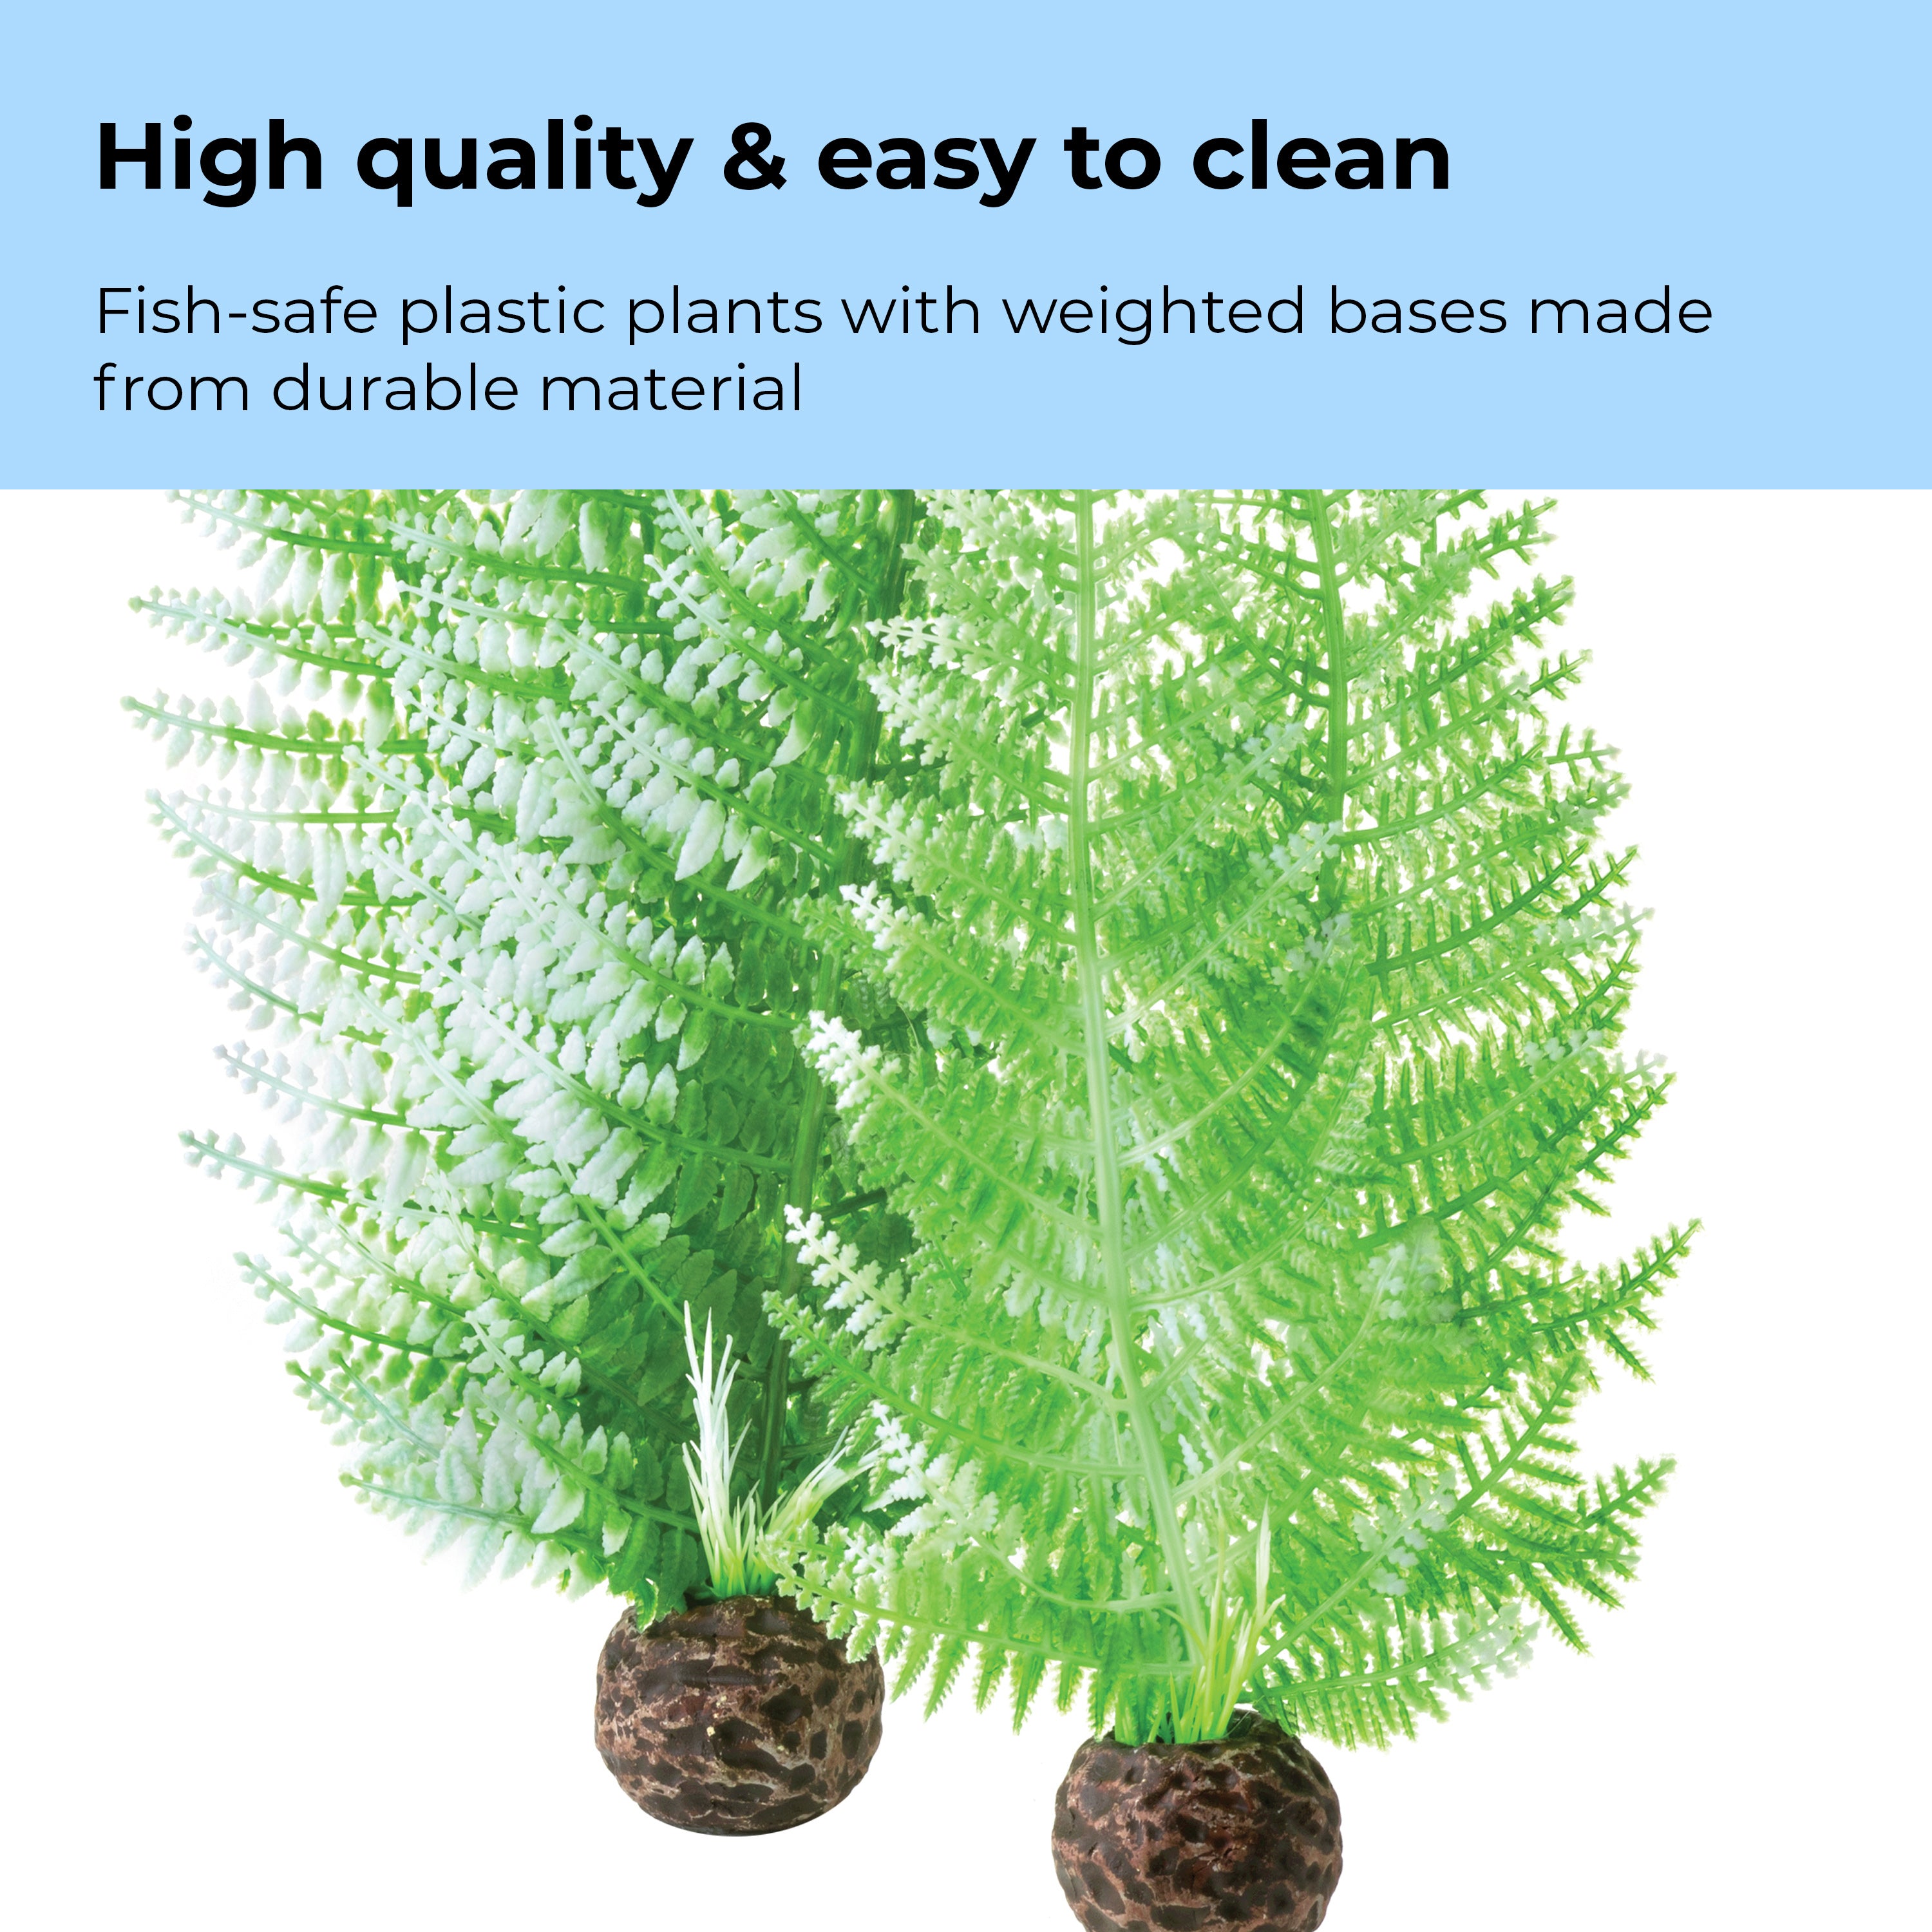 Fern Plant Set - High quality & easy to clean